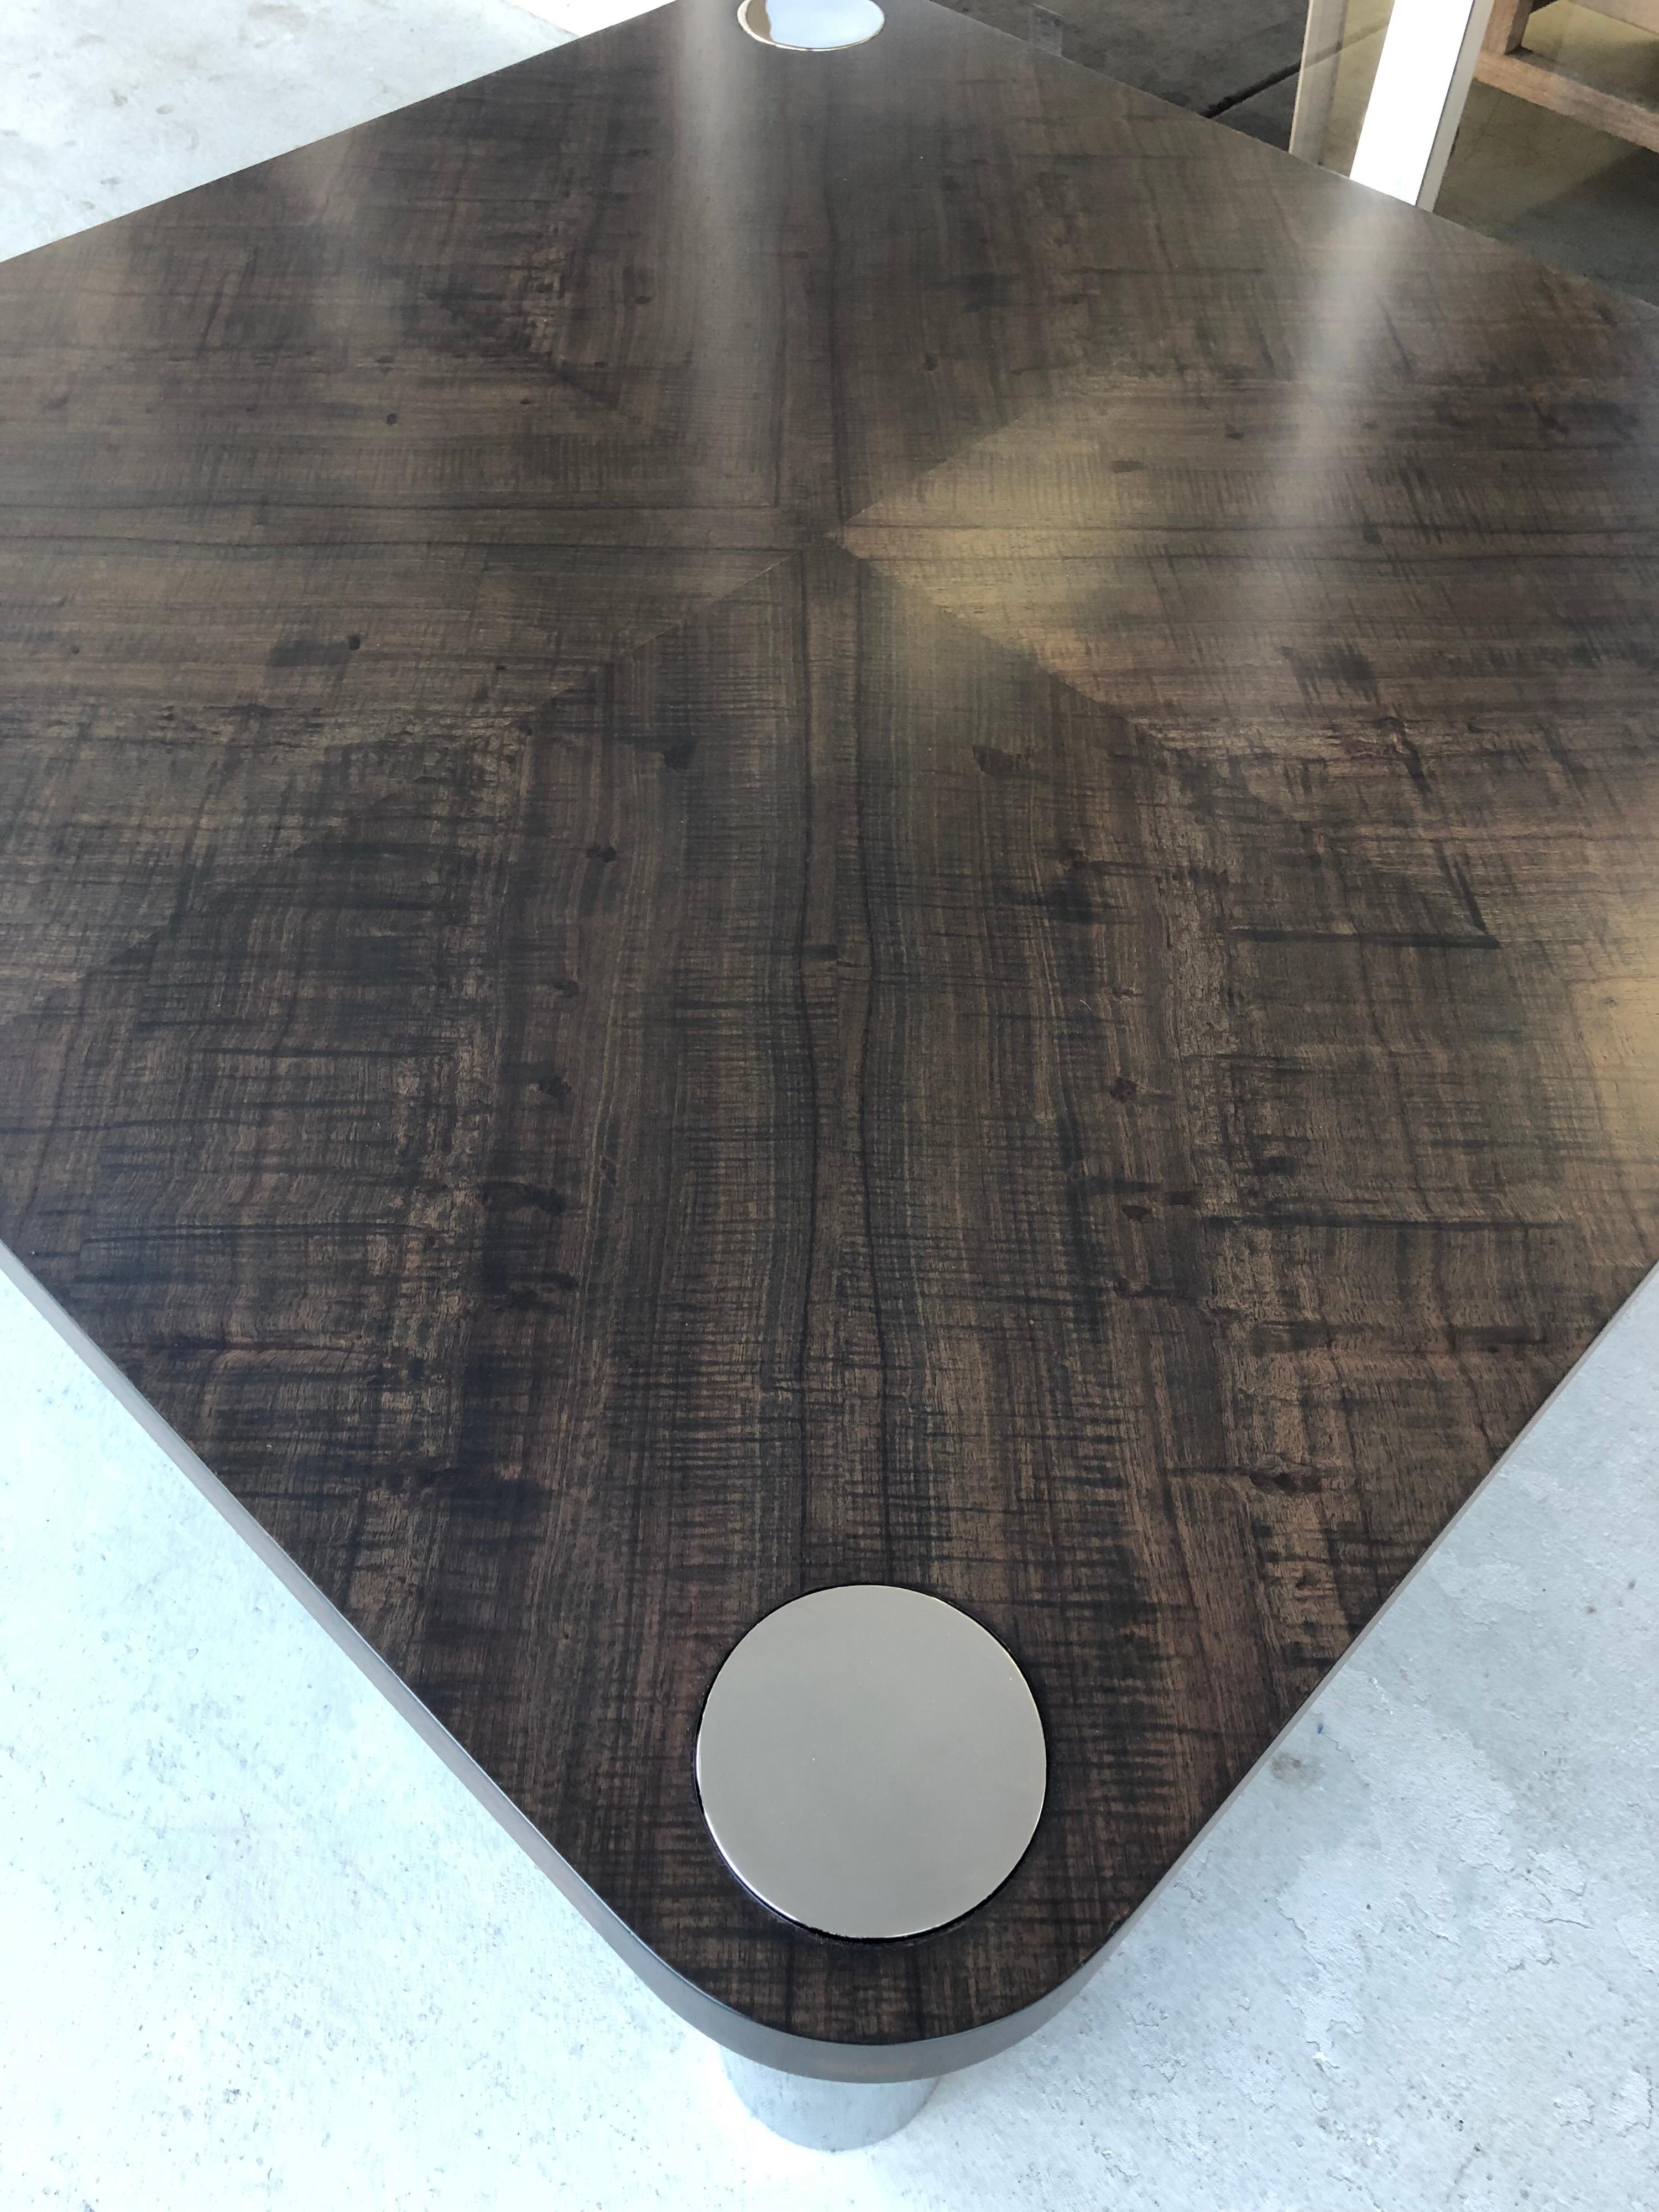 A wood table with chunky mirror polished stainless steel legs. The top has a subtle but beautiful grain pattern. Re-finished in light ebony.